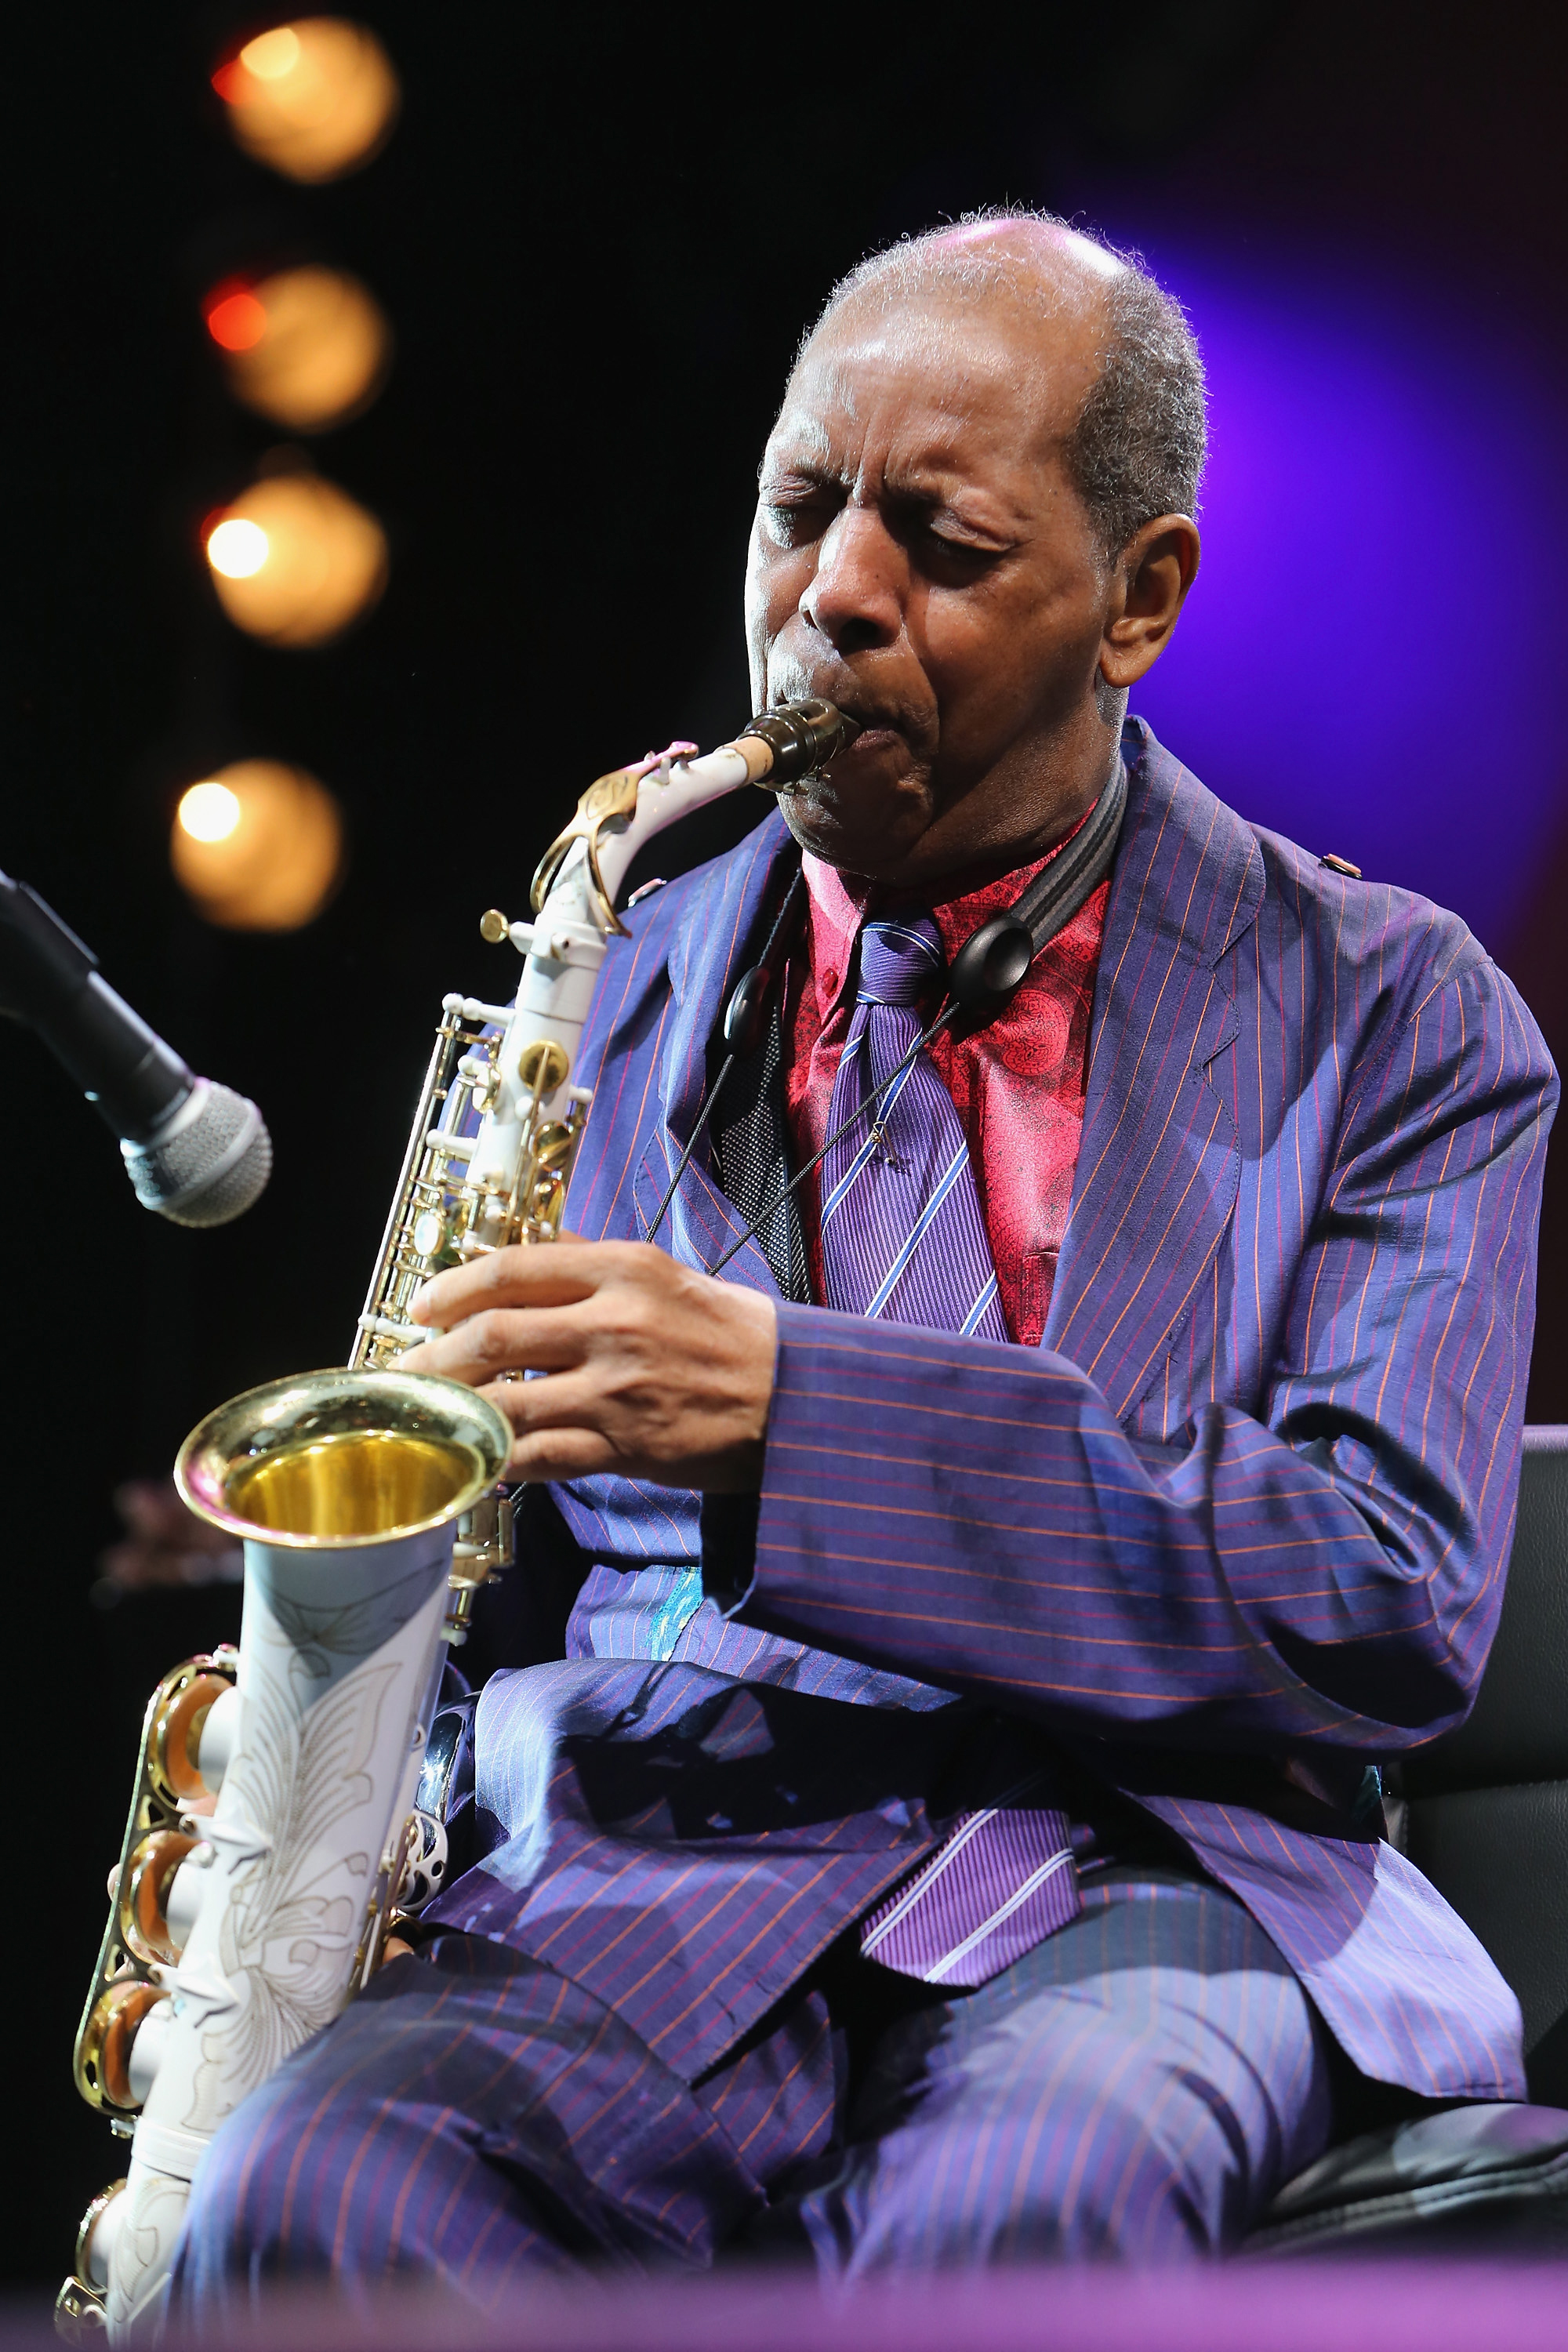 Ornette Coleman performs during "Celebrate Ornette:  The Music of Ornette Coleman", part of the 2014 Celebrate Brooklyn! season at the Prospect Park Bandshell on June 12, 2014 in Brooklyn, N.Y. (Al Pereira—Getty Images)